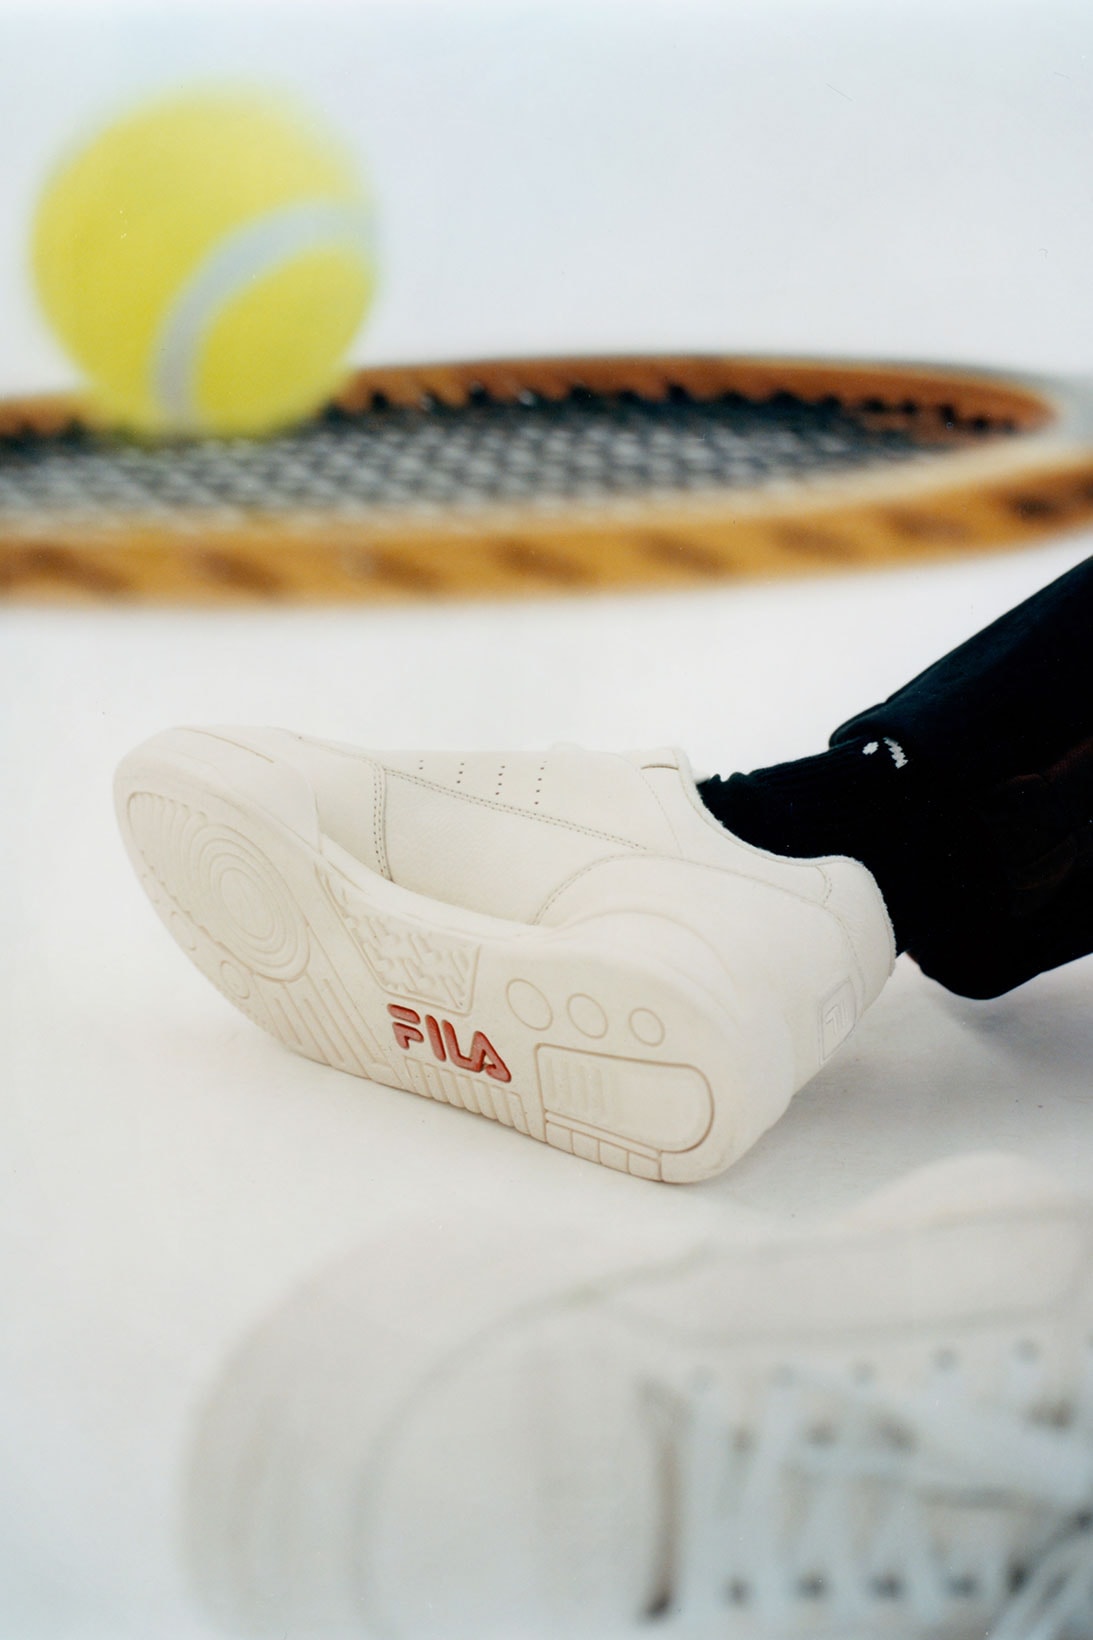 fila wood wood collaboration 70s tennis collection sneakers court